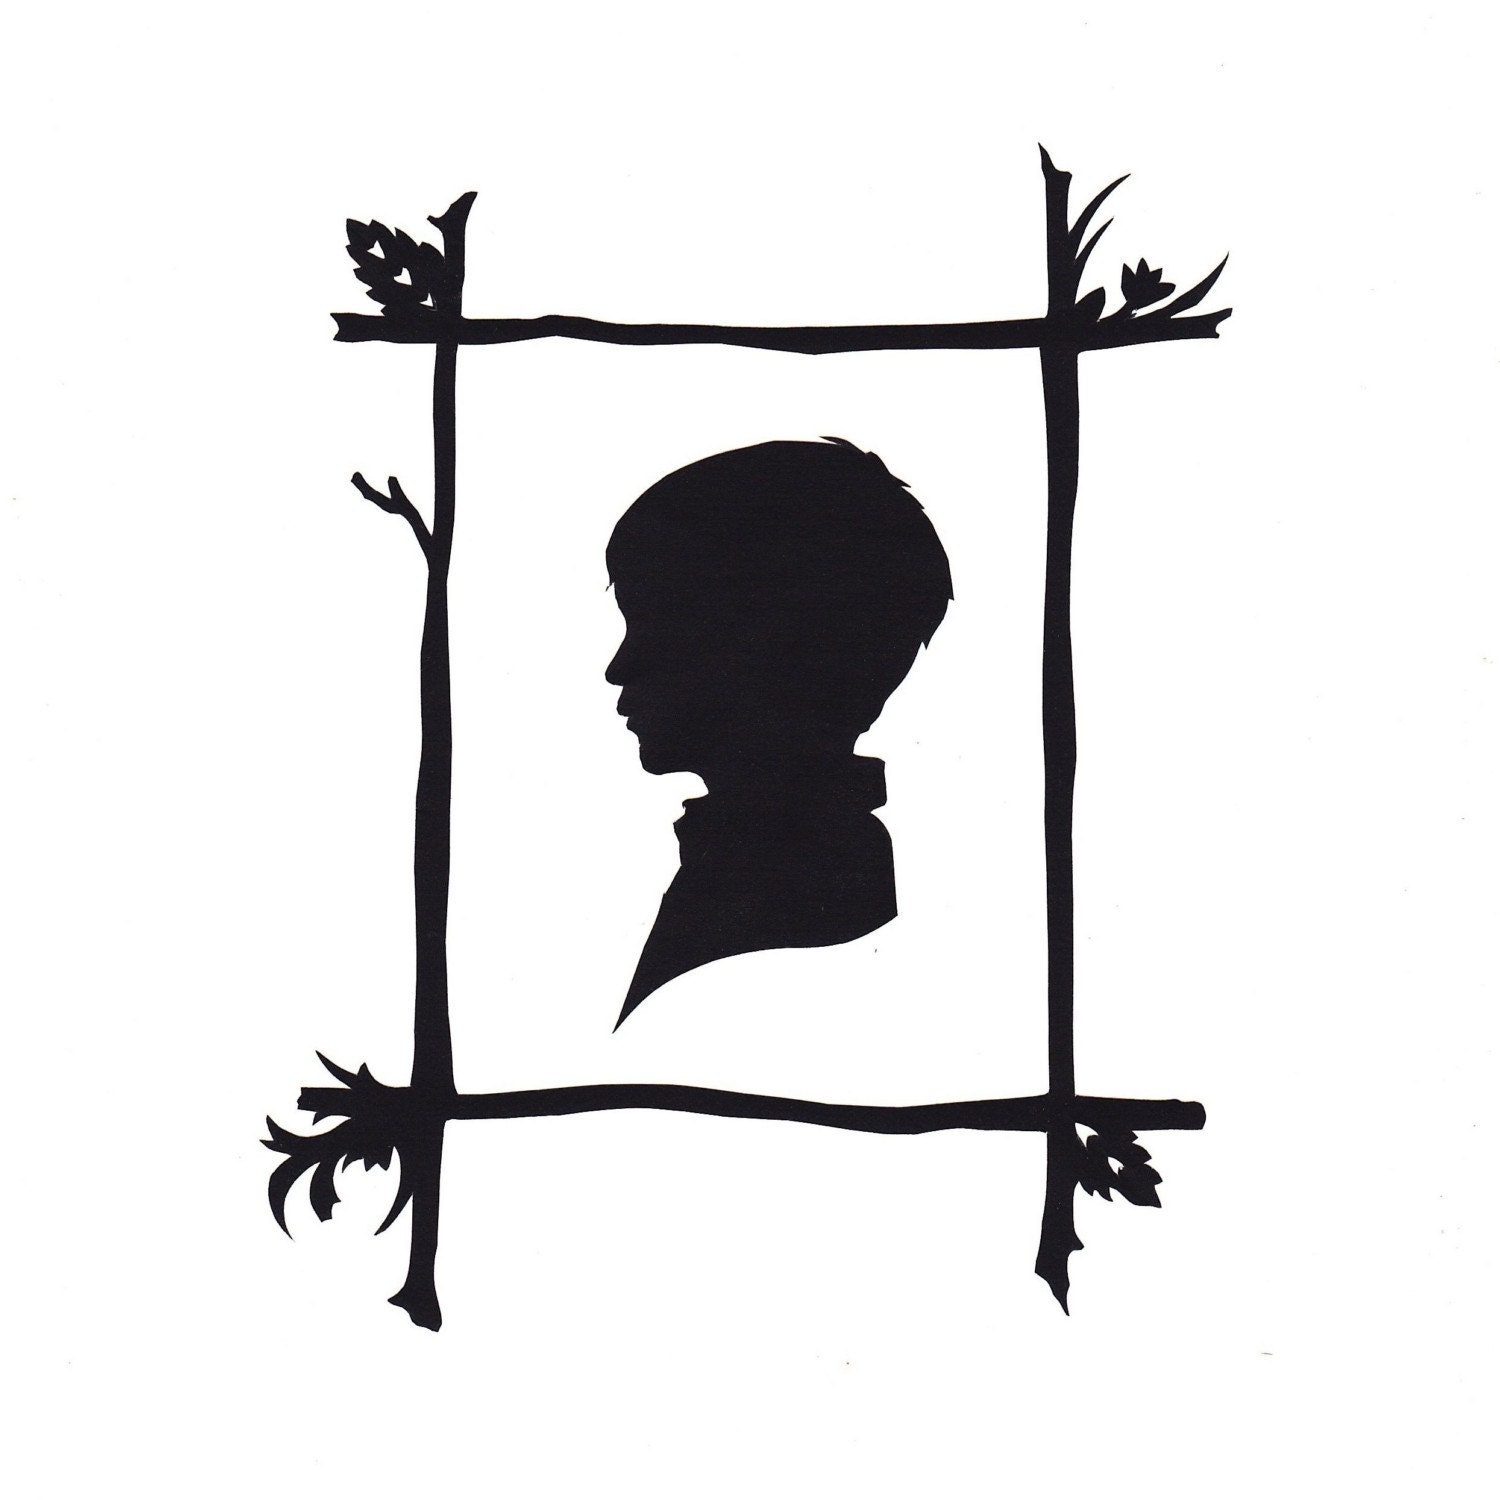 Artists Silhouettes